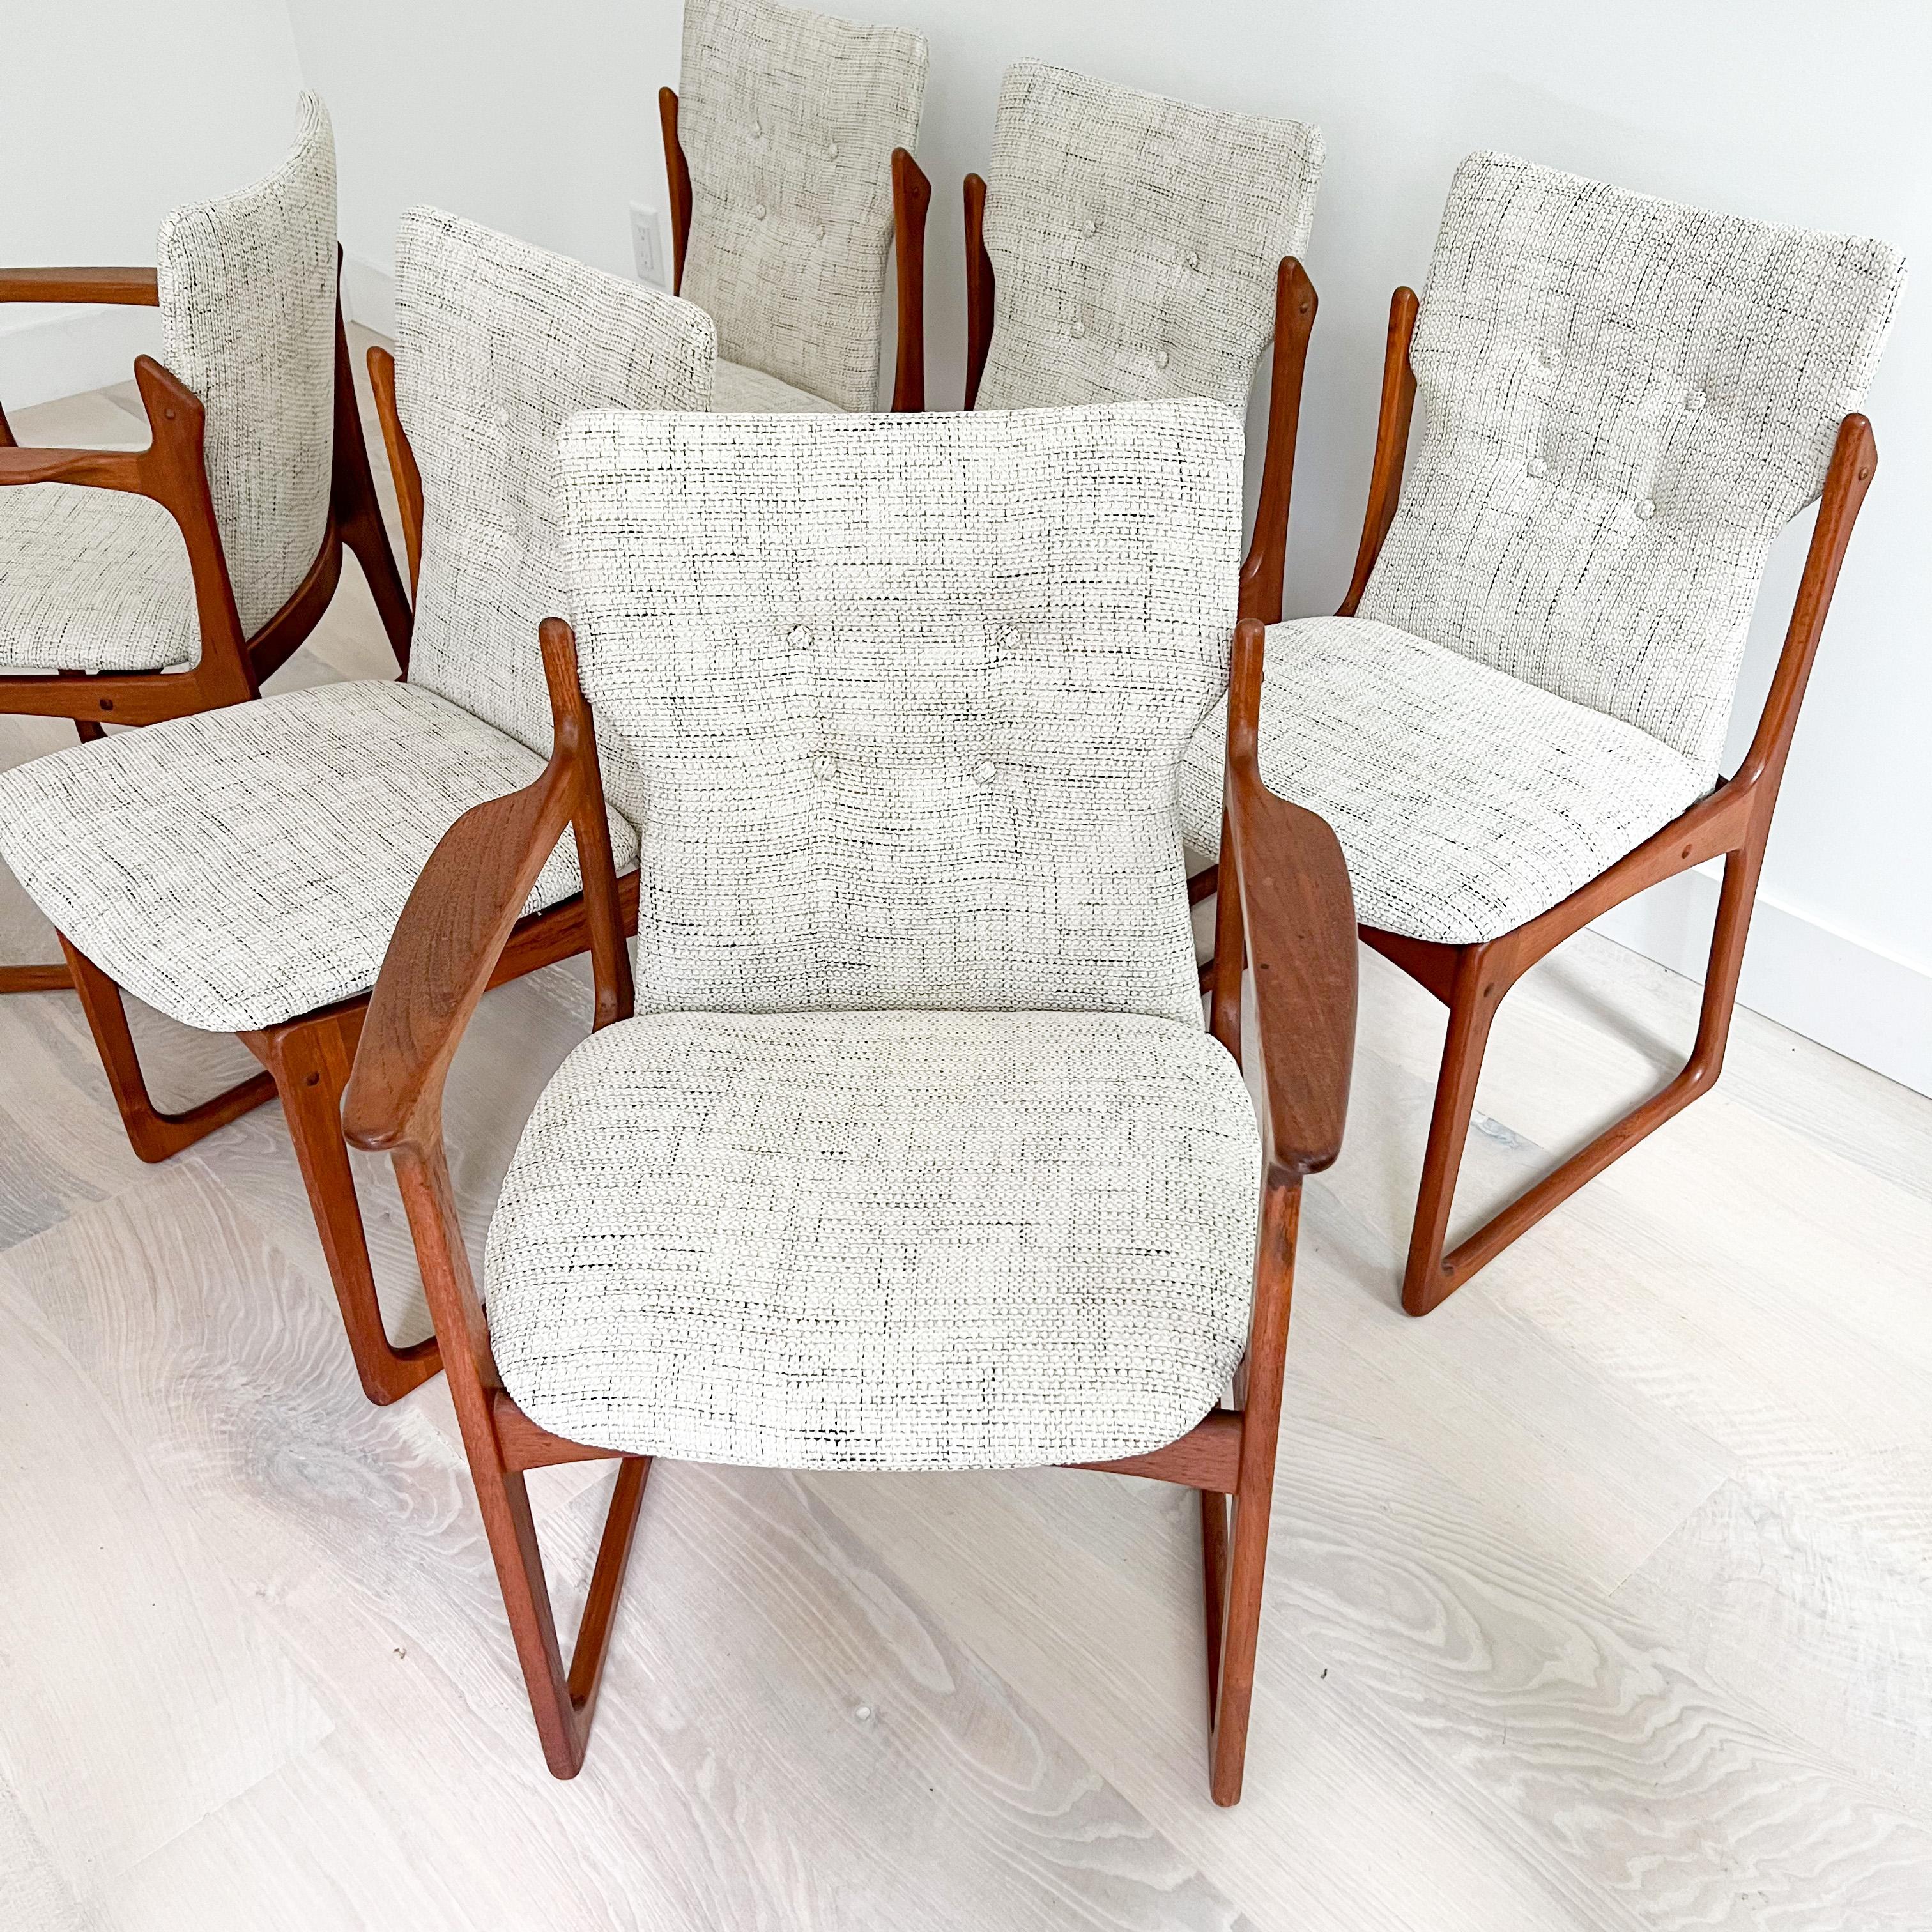 Set of 6 Mid Century Danish Teak Dining Chairs with New Upholstery by Art Furn 5